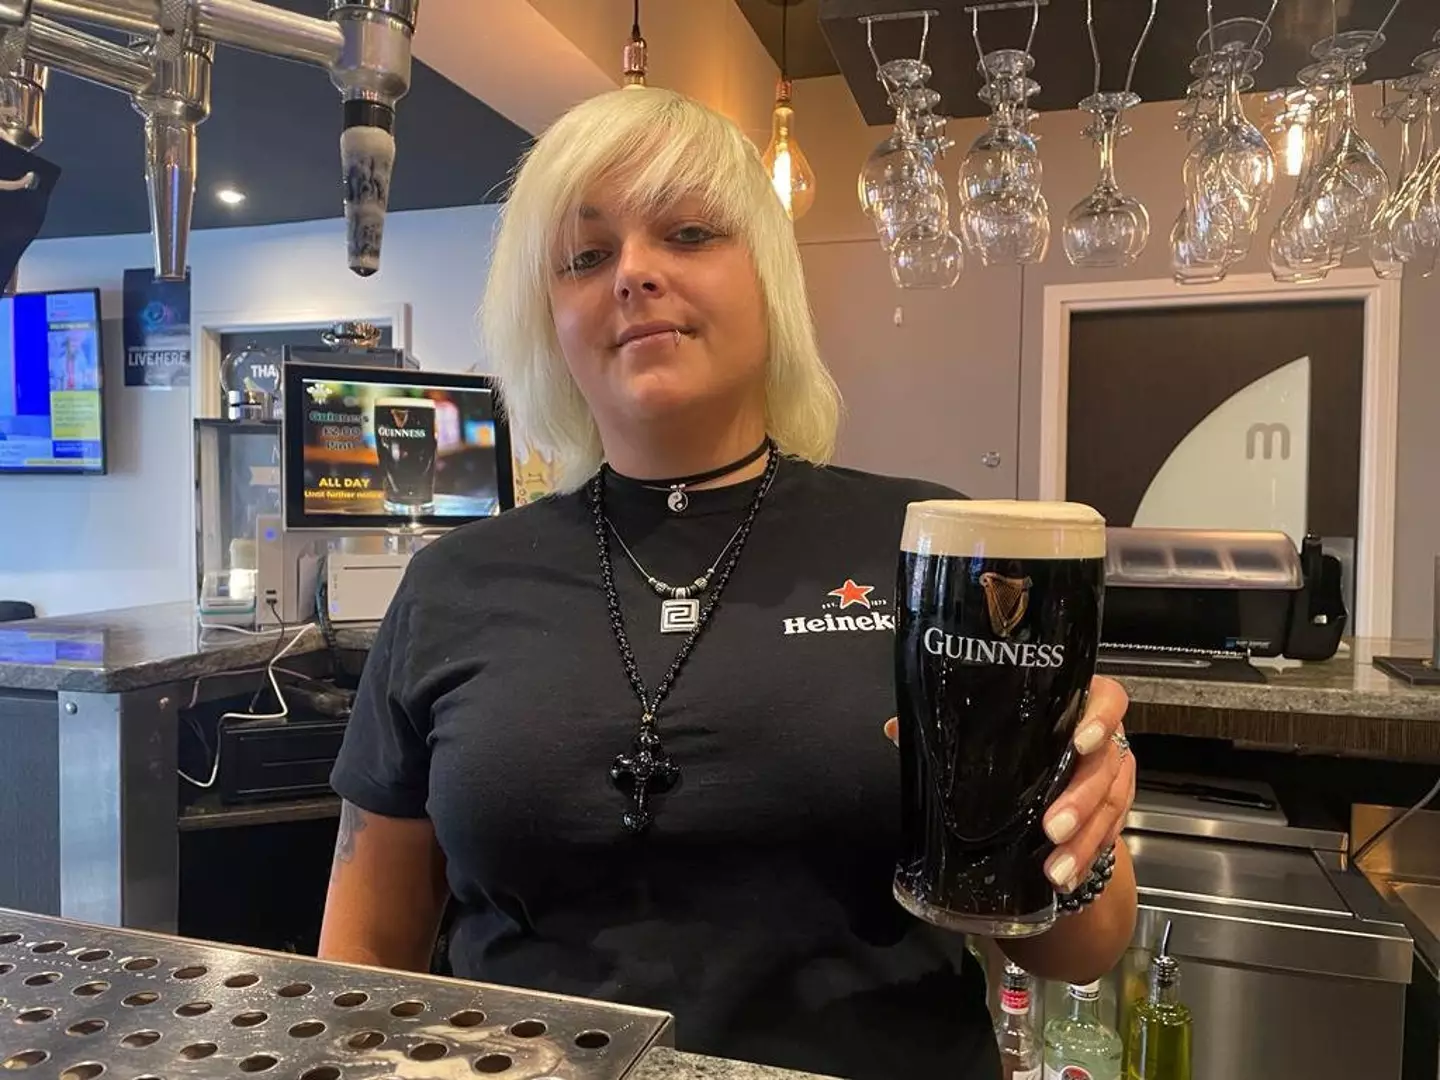 The Feathers, in Worcester, is selling pints of Guinness for just two quid.